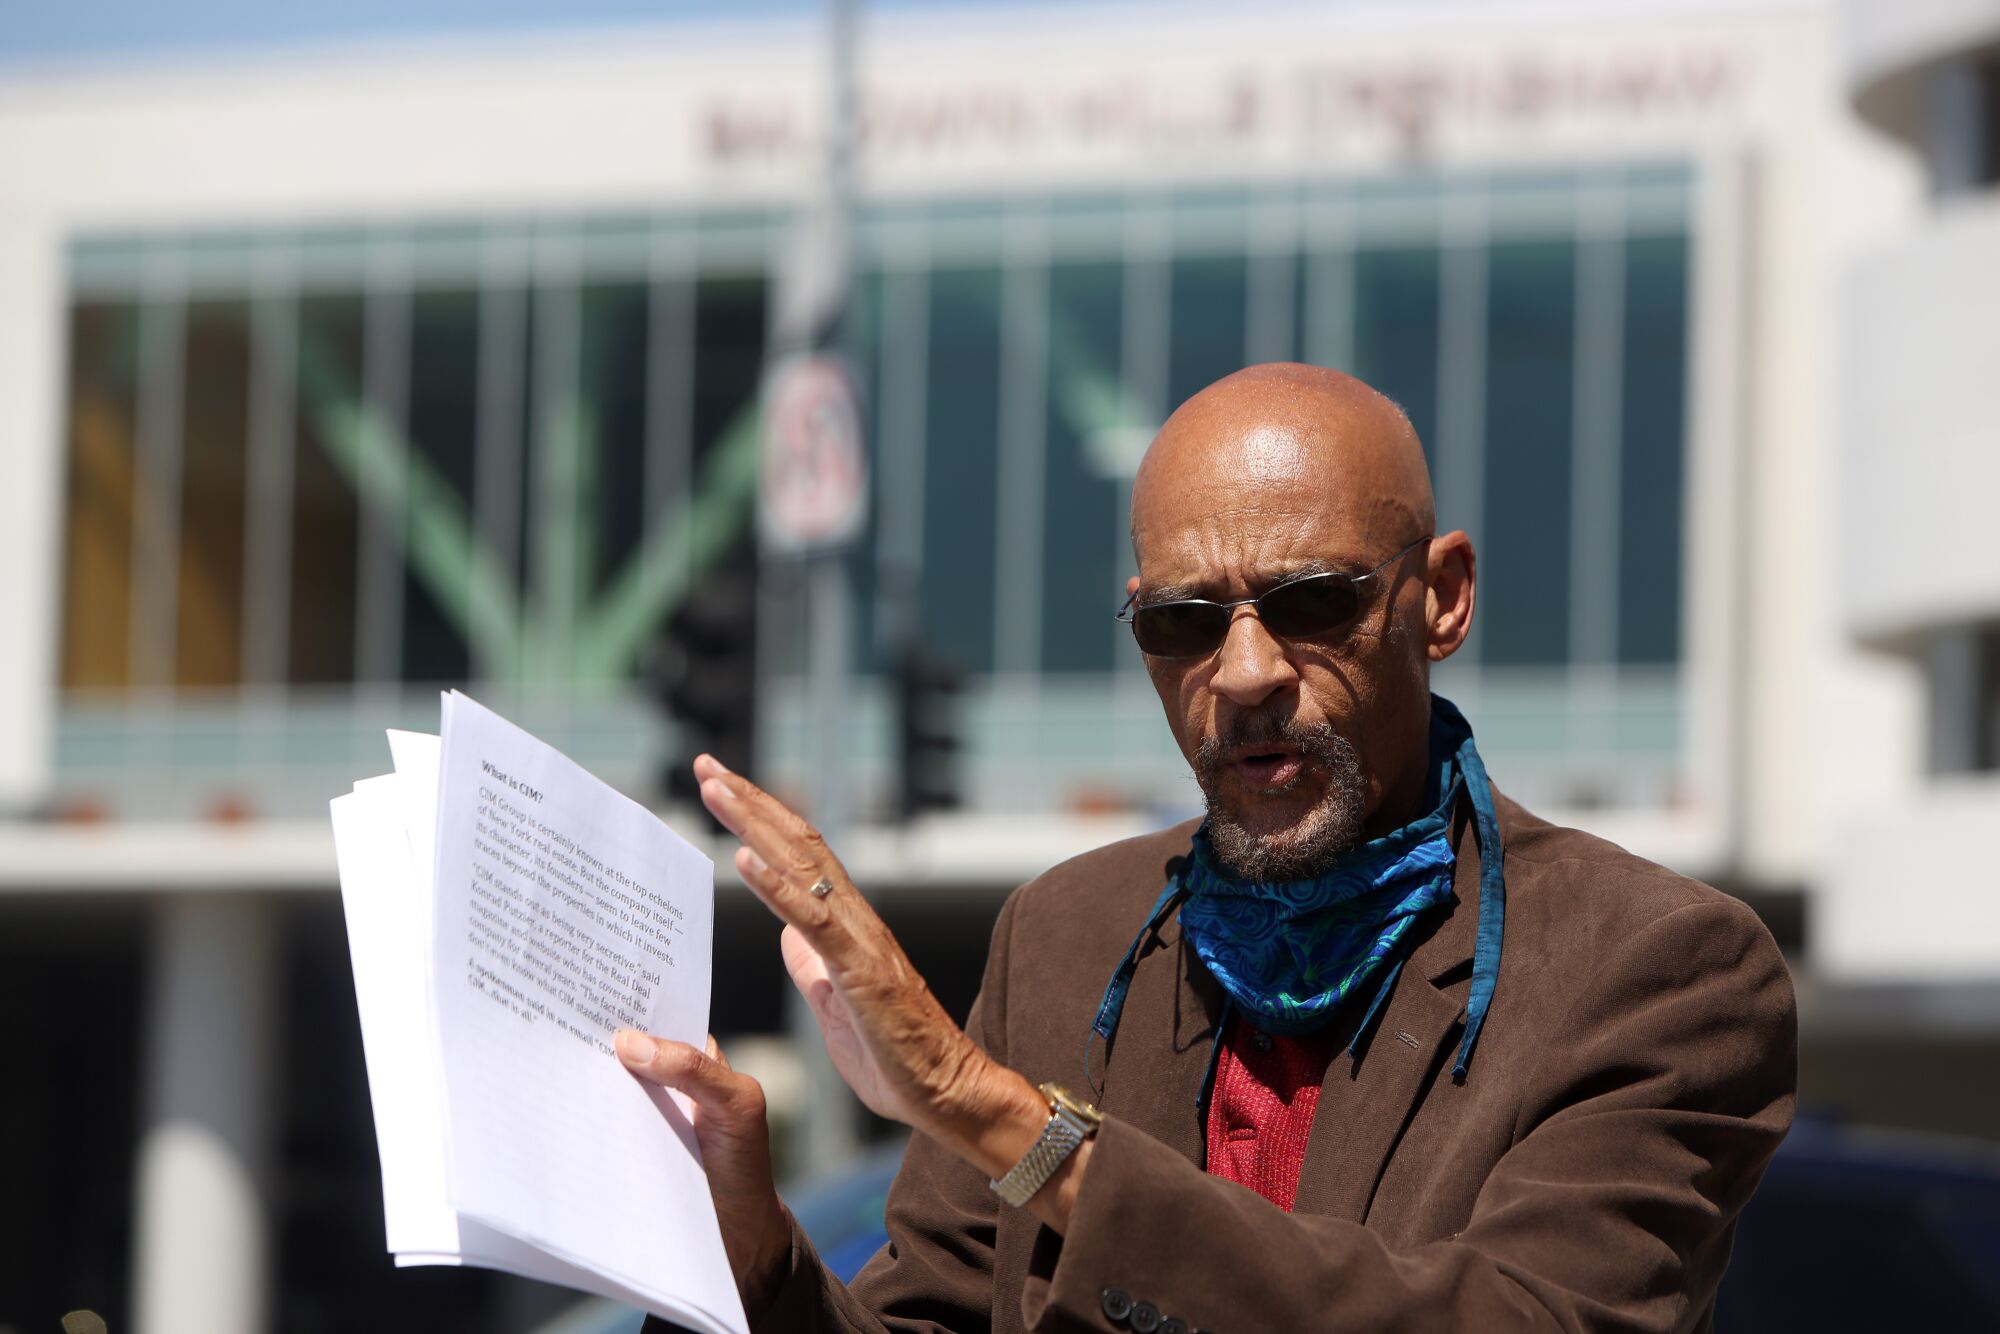 A man holding papers speaks outside a shopping center.